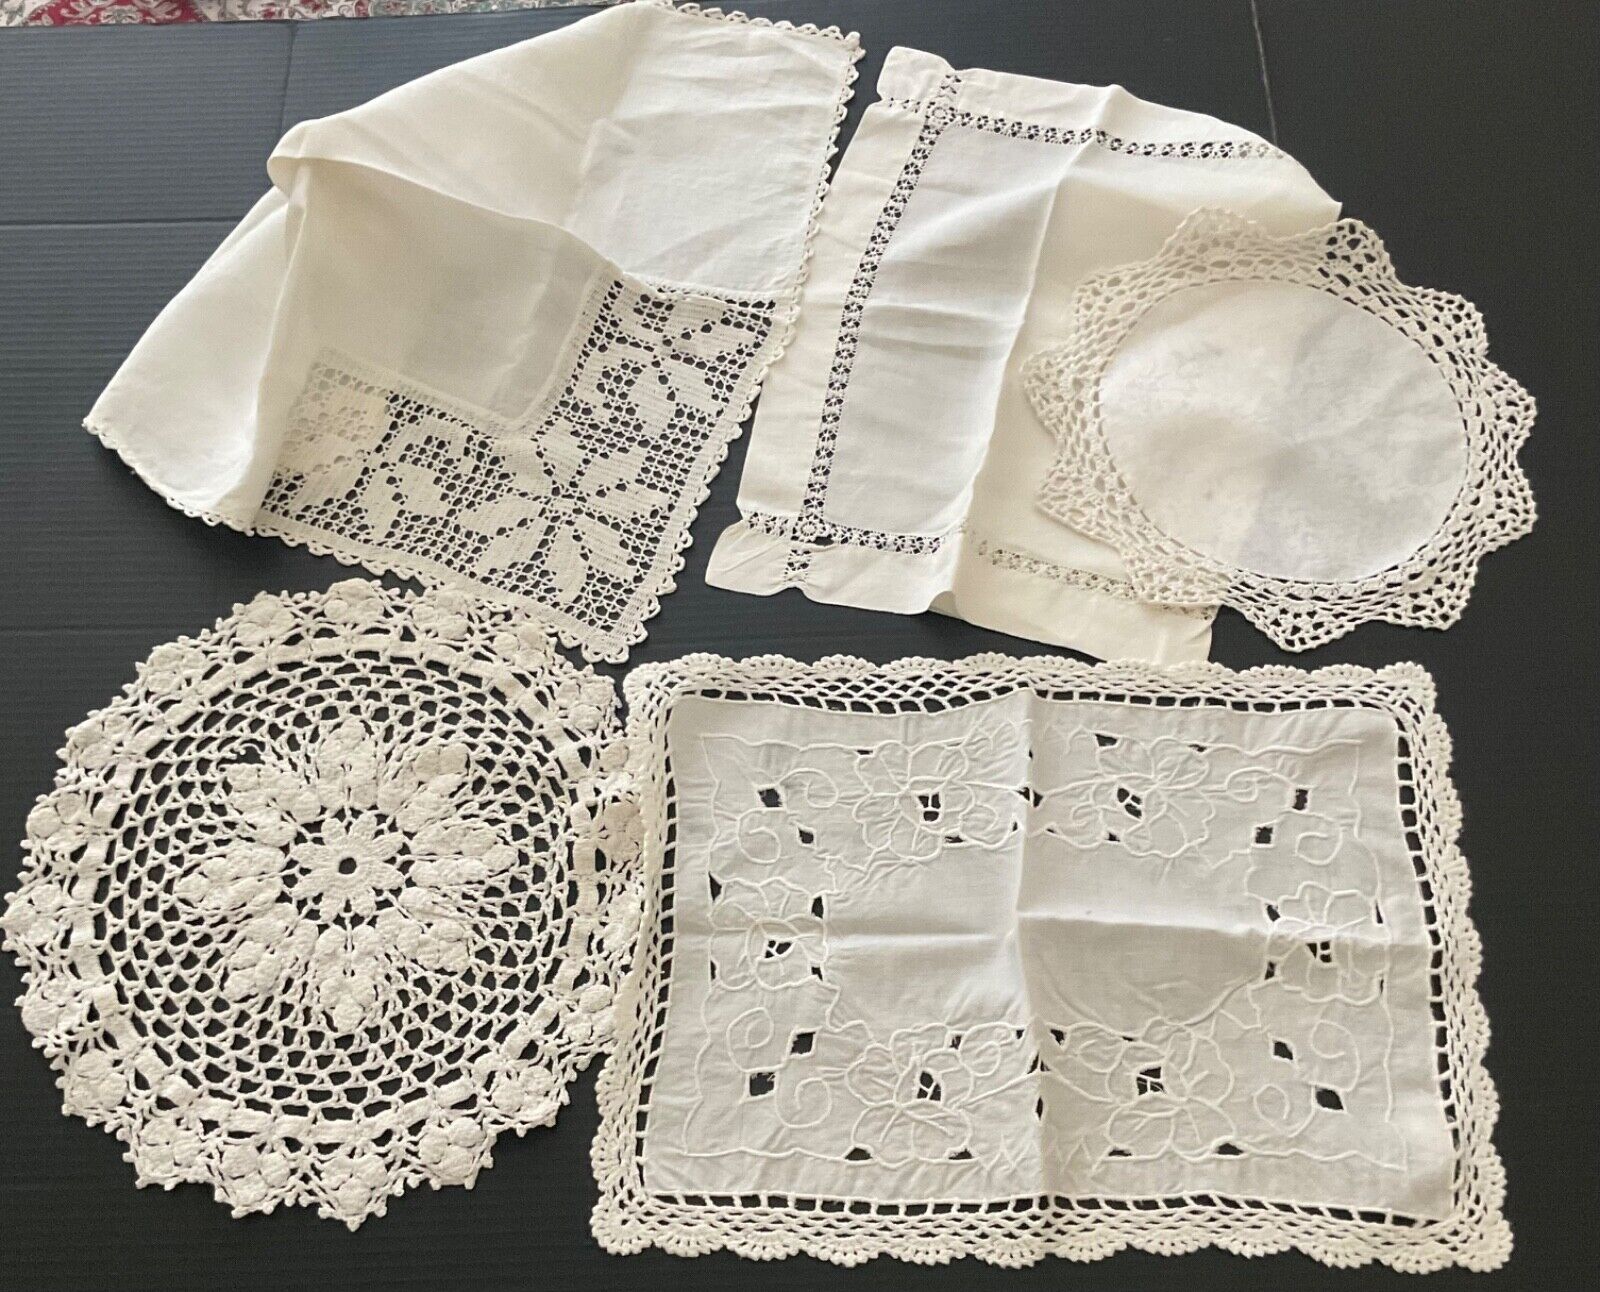 Vintage White Lot of 5 Doilies * Runner* All appear Handcrafted*